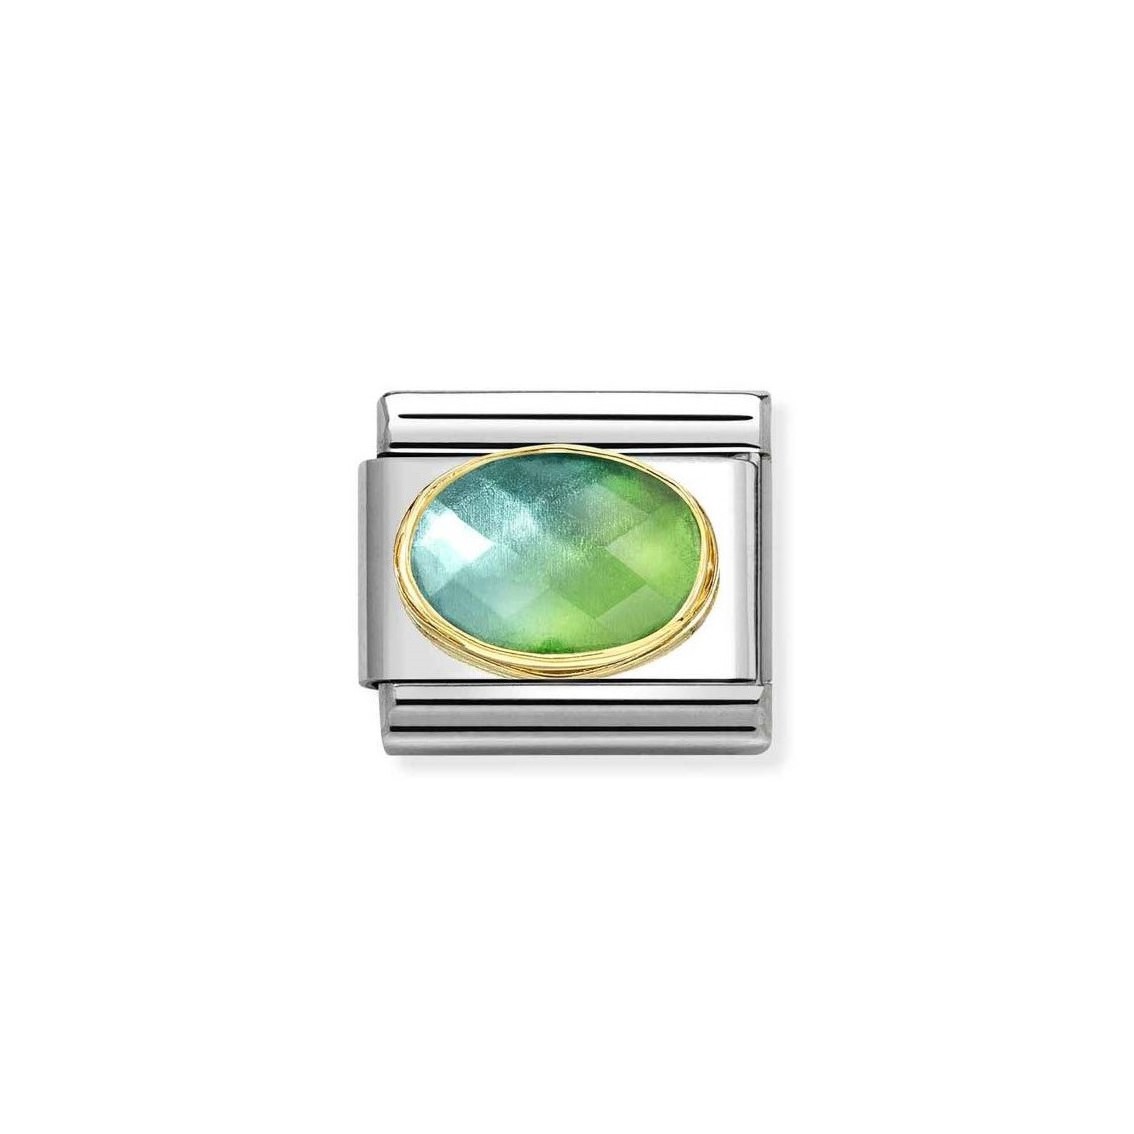 Nomination Faceted Stone Charm with Gold Border - Blue Green